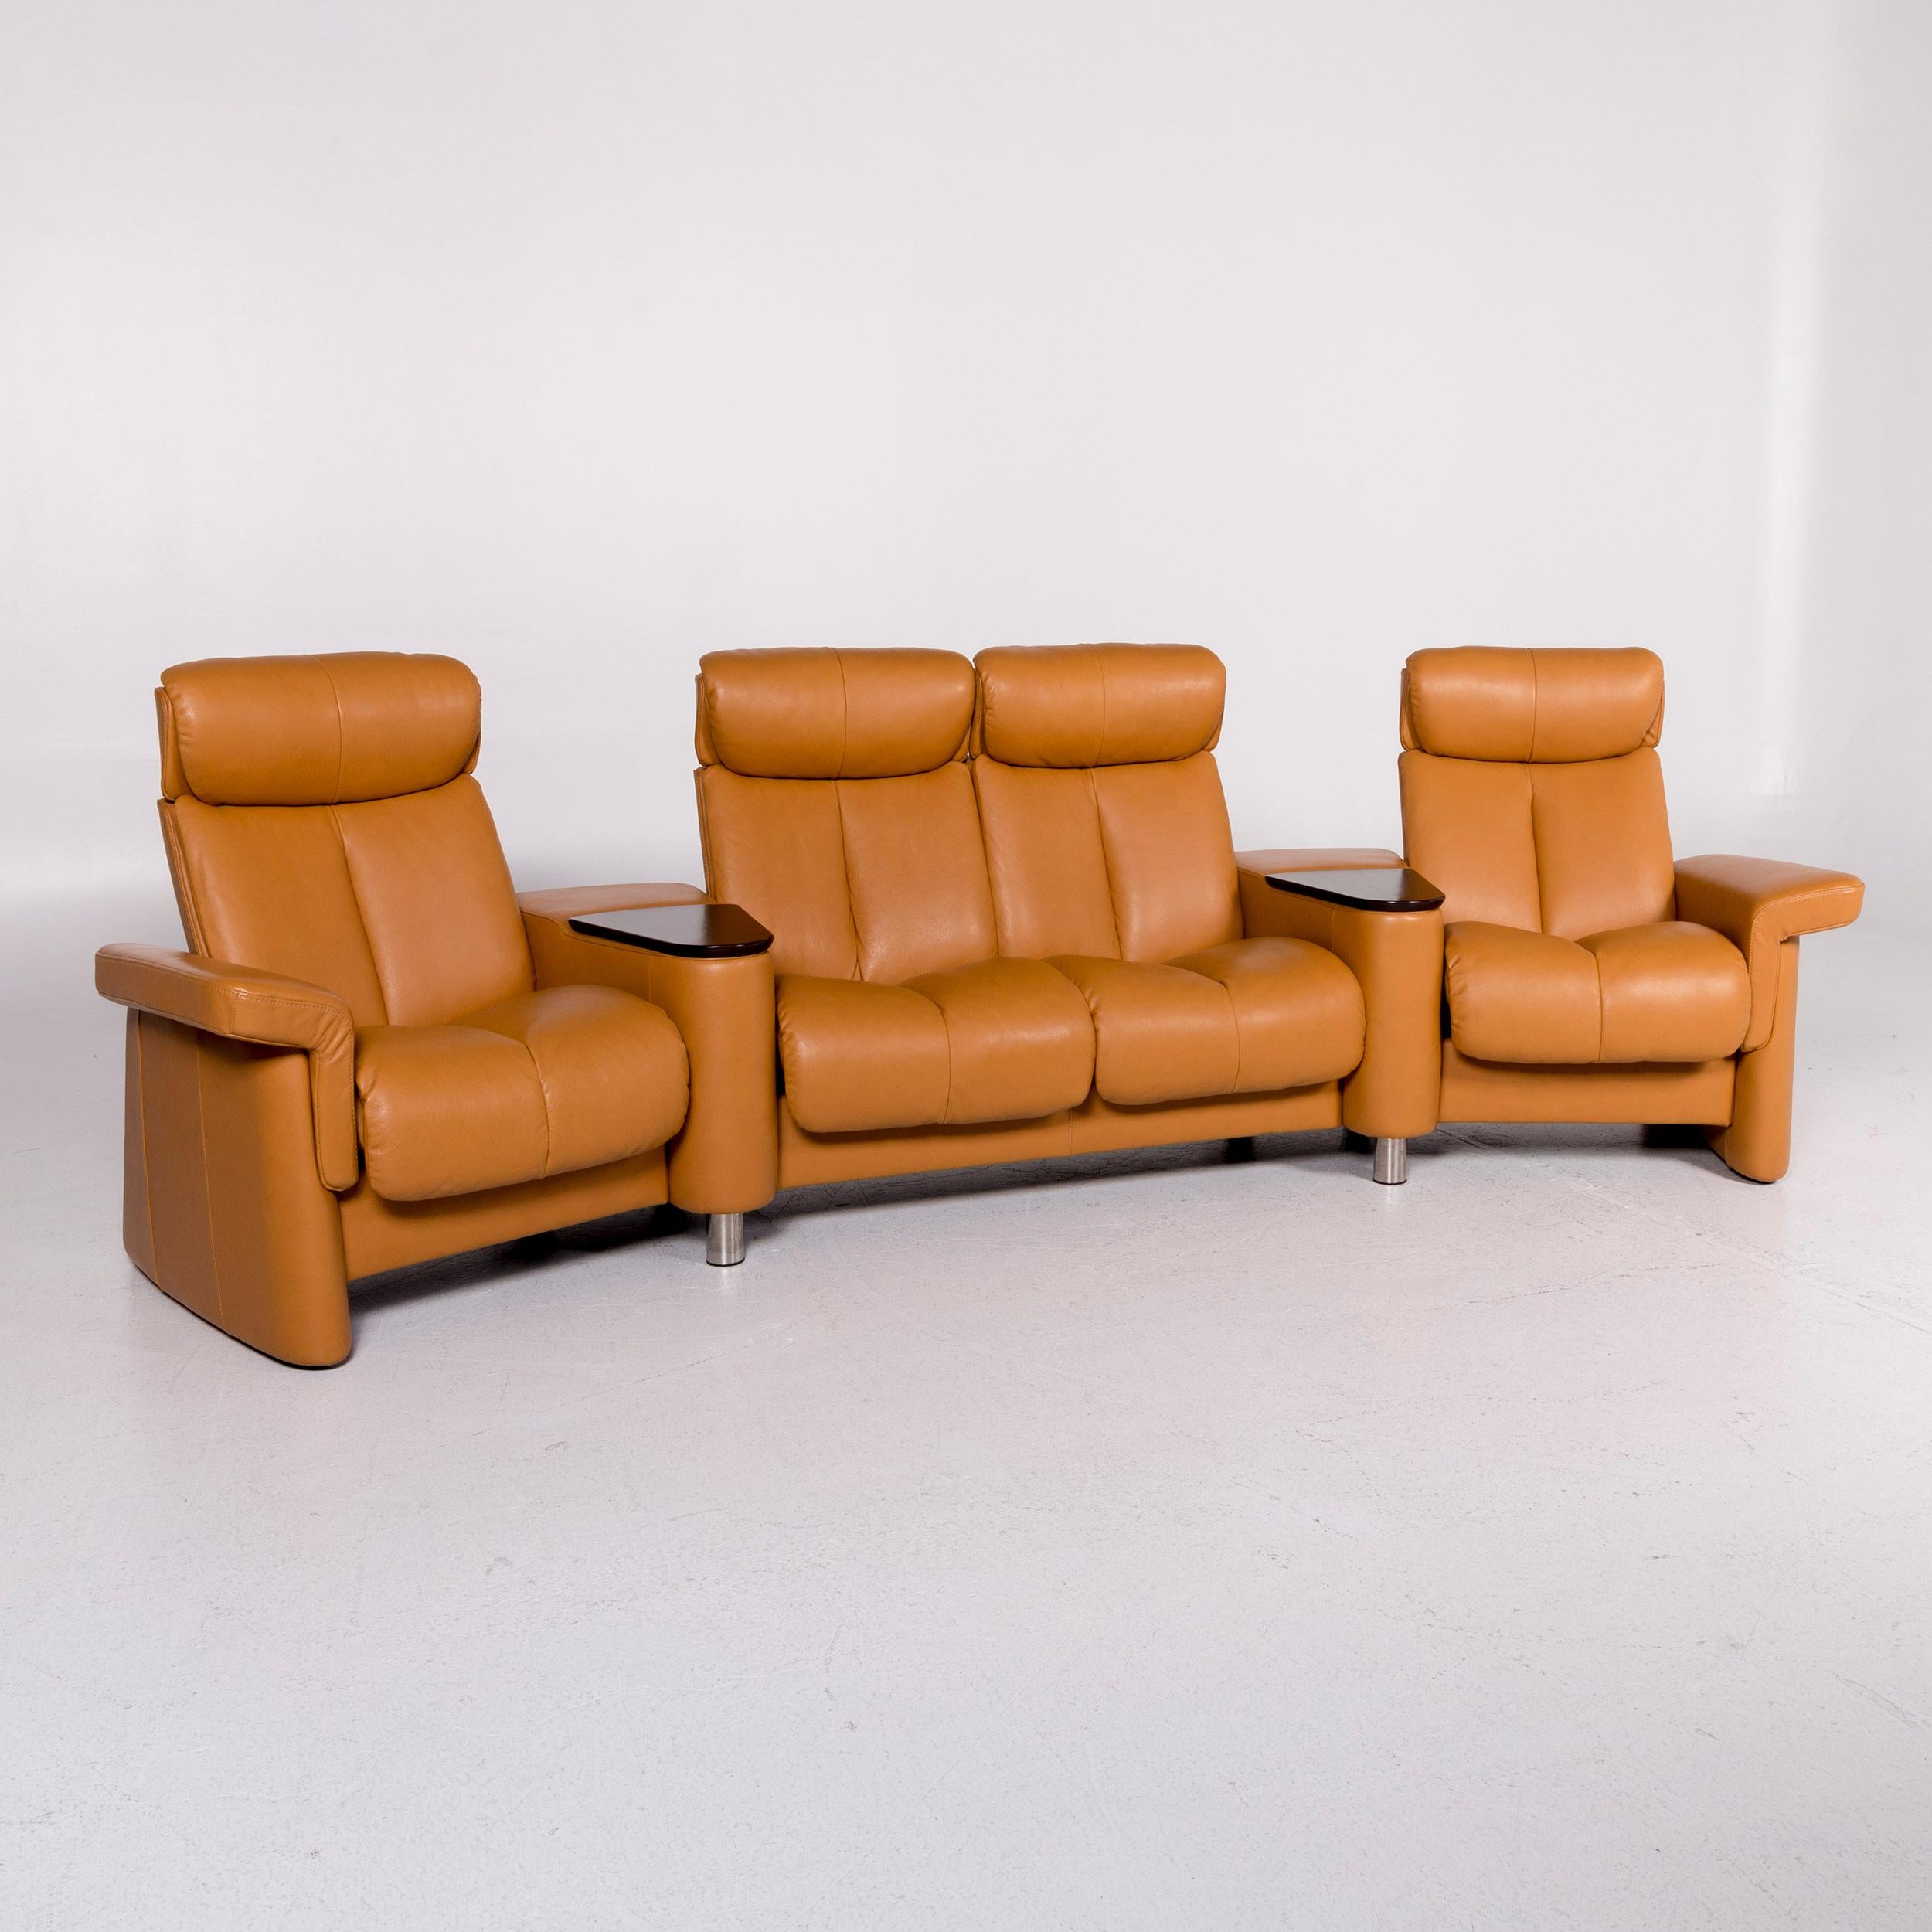 We bring to you a stressless legend leather corner sofa set mustard yellow yellow ocher 1x corner.
   
 

 Product measurements in centimeters:
 

 Depth 107
Width 322
Height 101
Seat-height 48
Rest-height 60
Seat-depth 54
Seat-width